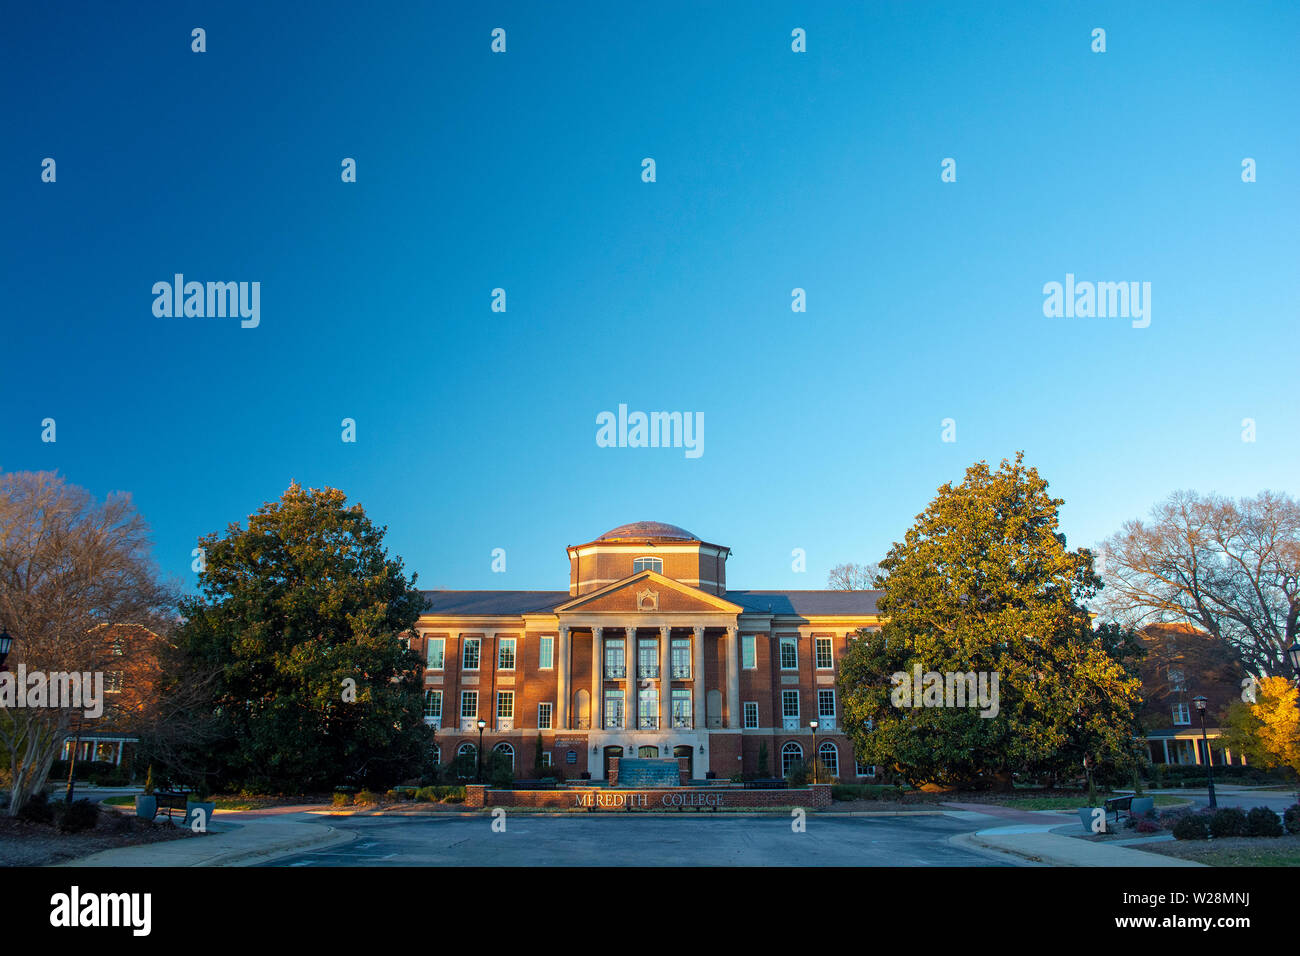 Meredith College in Raleigh, North Carolina Foto Stock